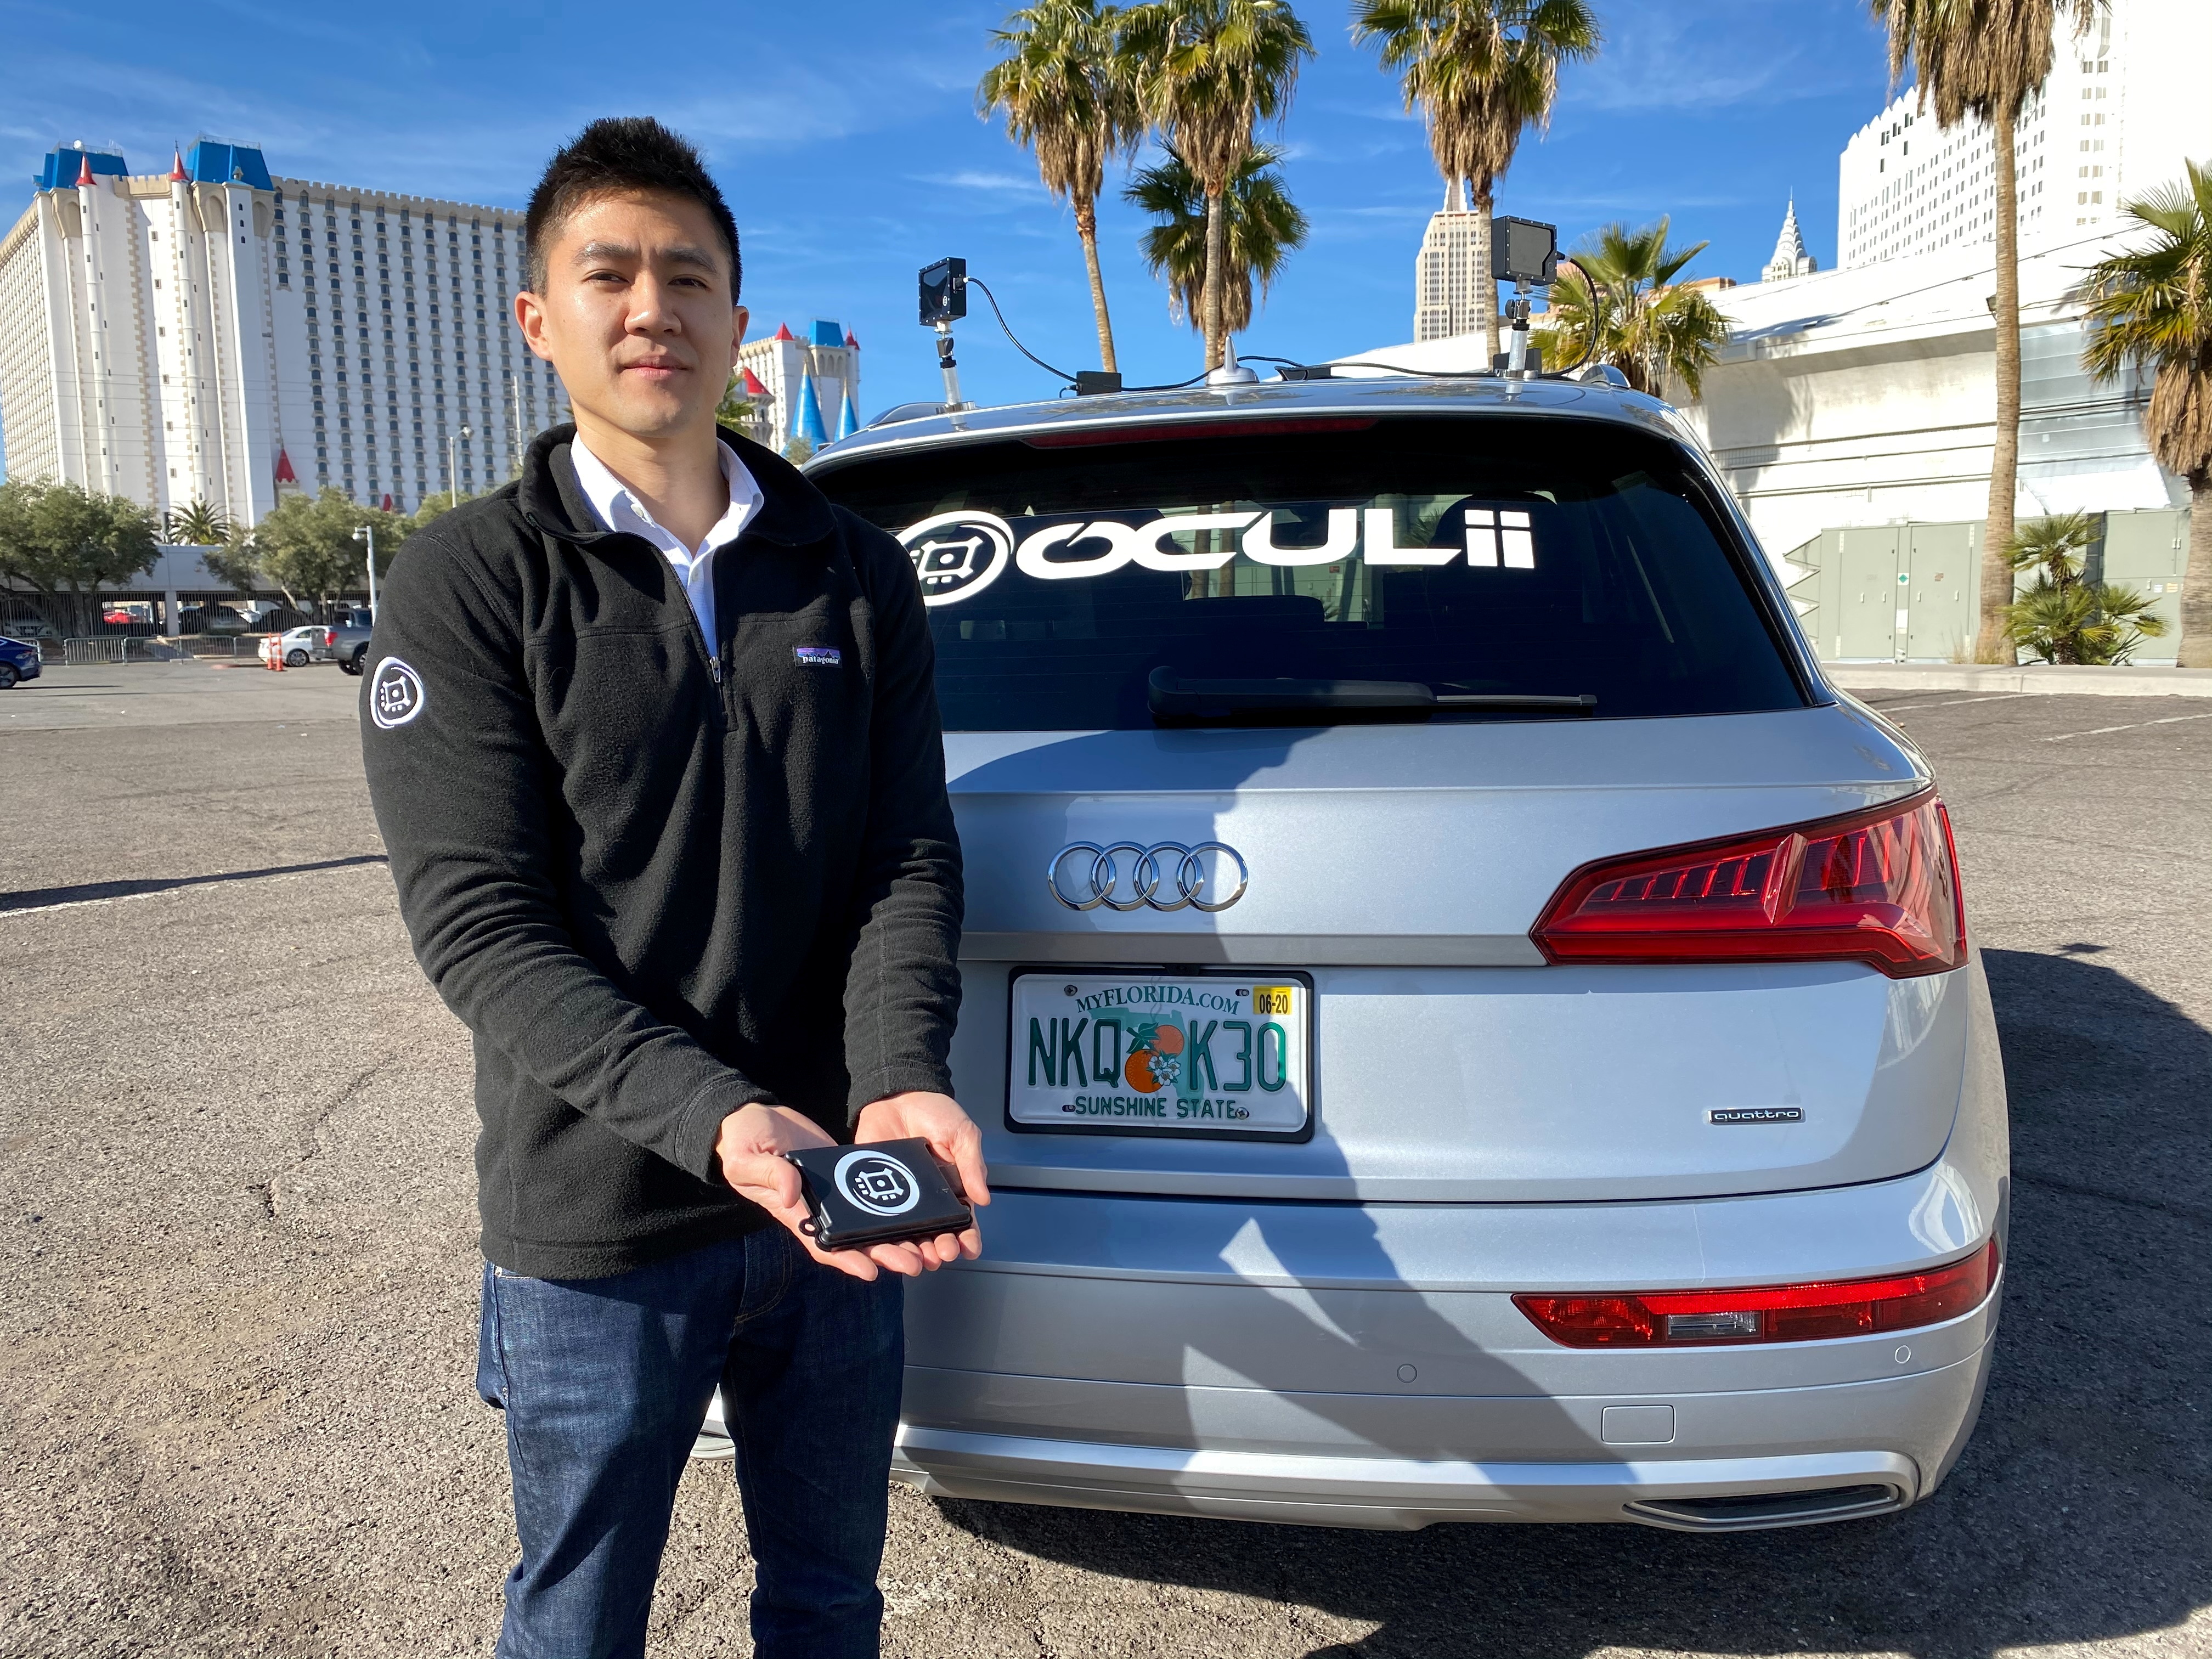 Oculii CEO Steven Hong shows the company's radar kit at the CES tech show in Las Vegas, Nevada